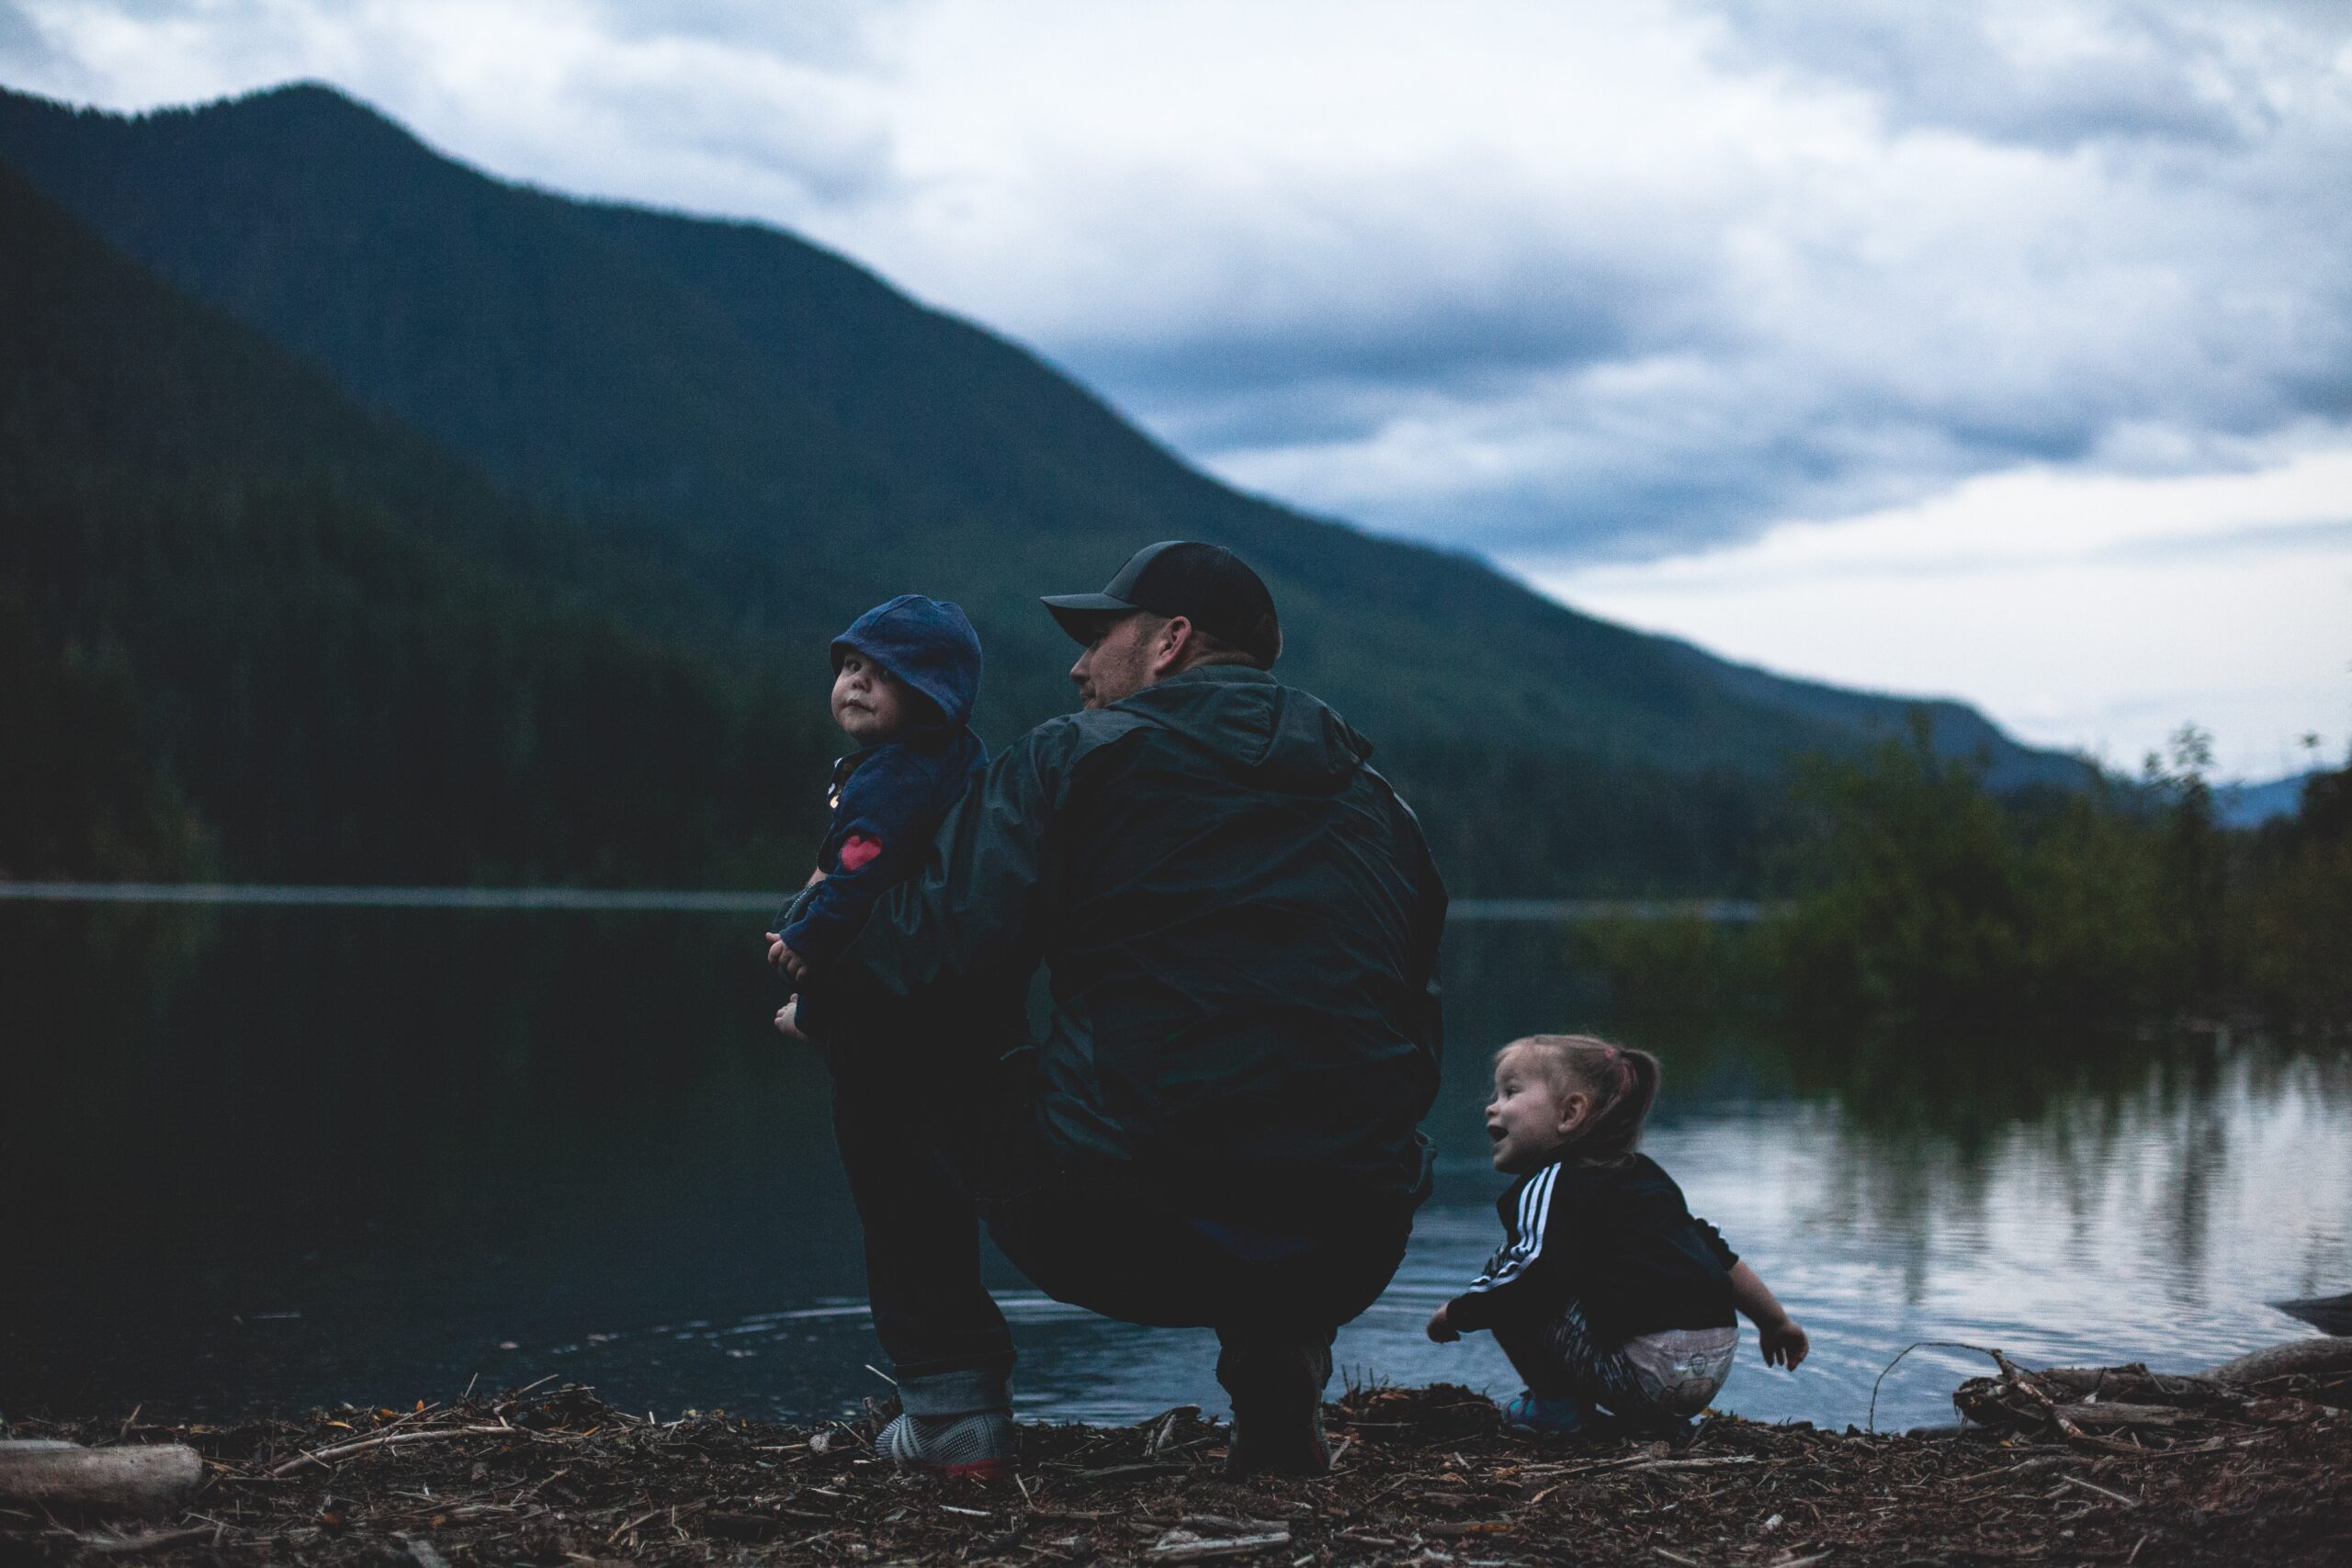 A father and his kids near a body of water